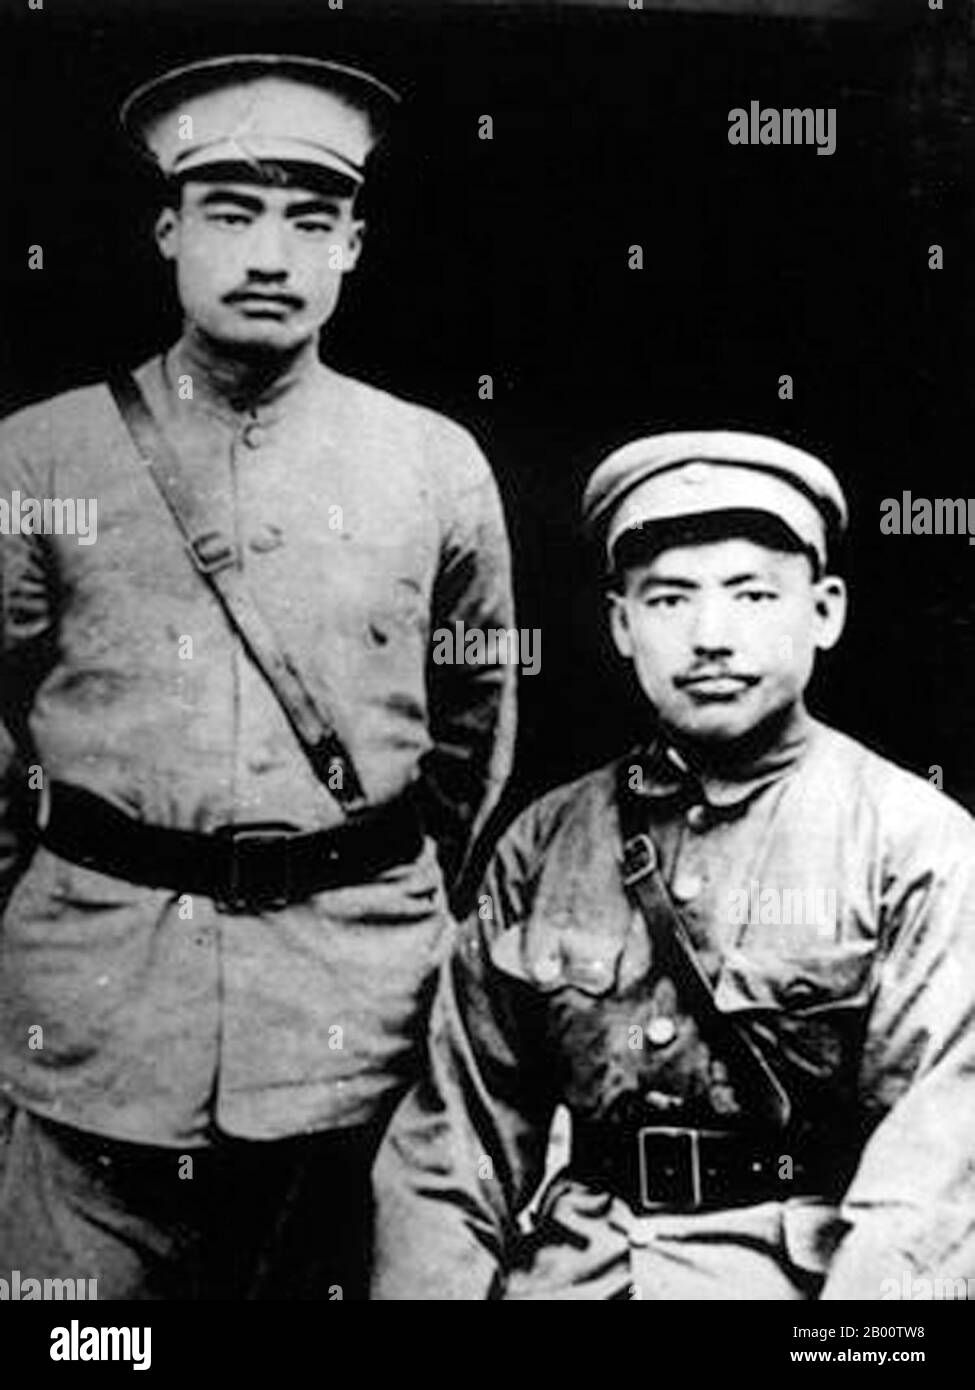 China: Chinese Muslim warlord brothers Ma Bufang (left, 1903-1975) and Ma Buqing (right, 1901–1977).  Ma Bufang and Ma Buqing were prominent Ma clique warlords in China during the Republic of China era, controlling armies in the northwestern province of Qinghai. Their father Ma Qi formed the Ninghai Army in Qinghai in 1915, and received civilian and military posts from the Beiyang Government in Beijing in that same year confirming his military and civilian authority in Qinghai. Stock Photo